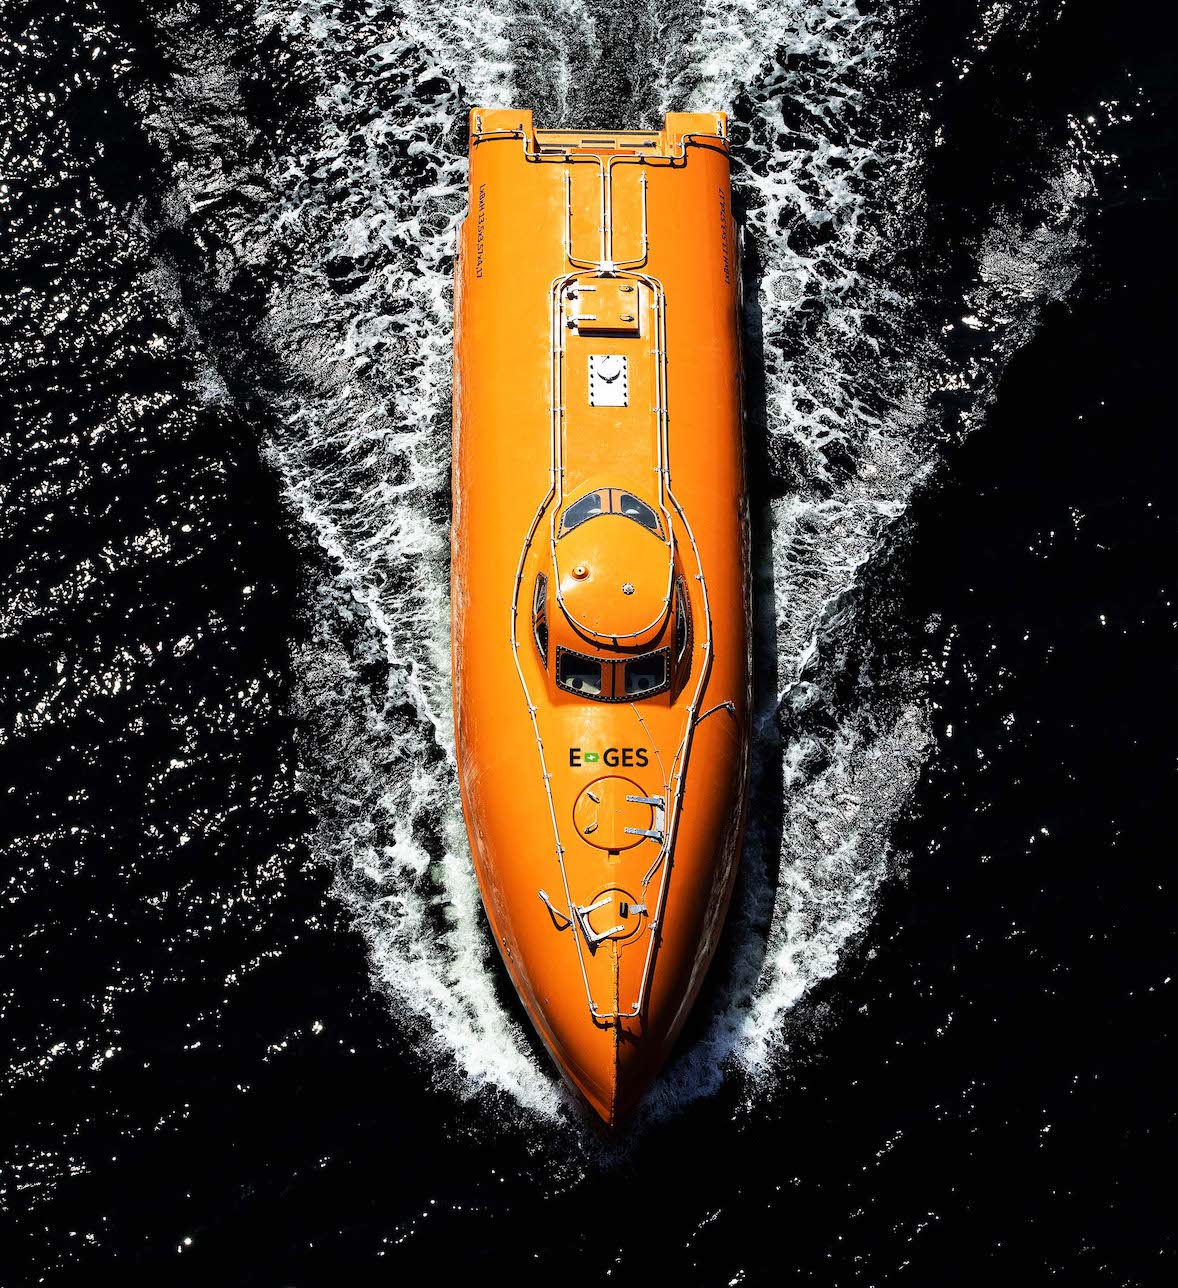 Life boat from above